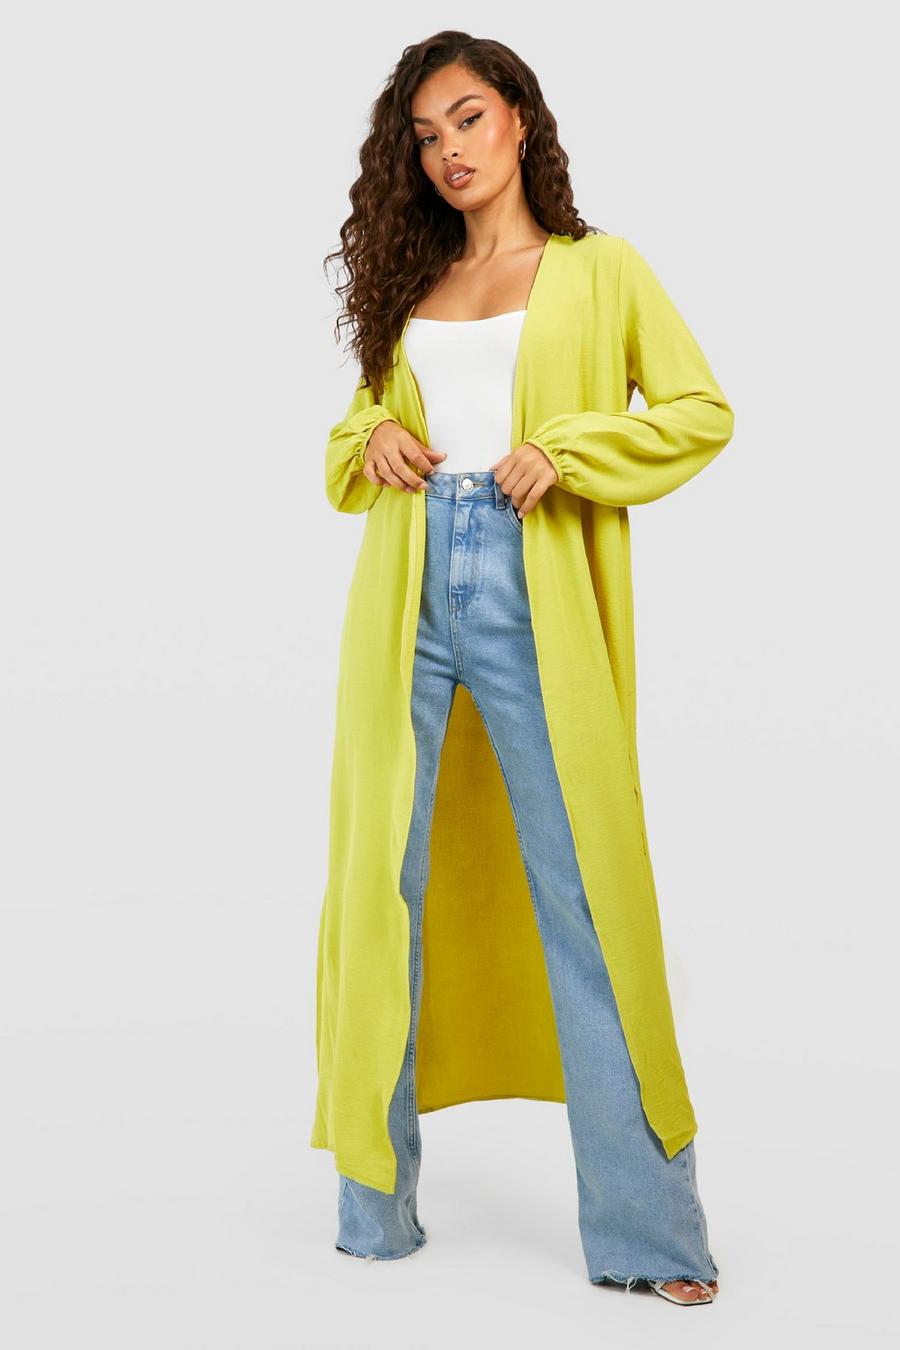 Chartreuse yellow Maxi Textured Woven Belted Kimono